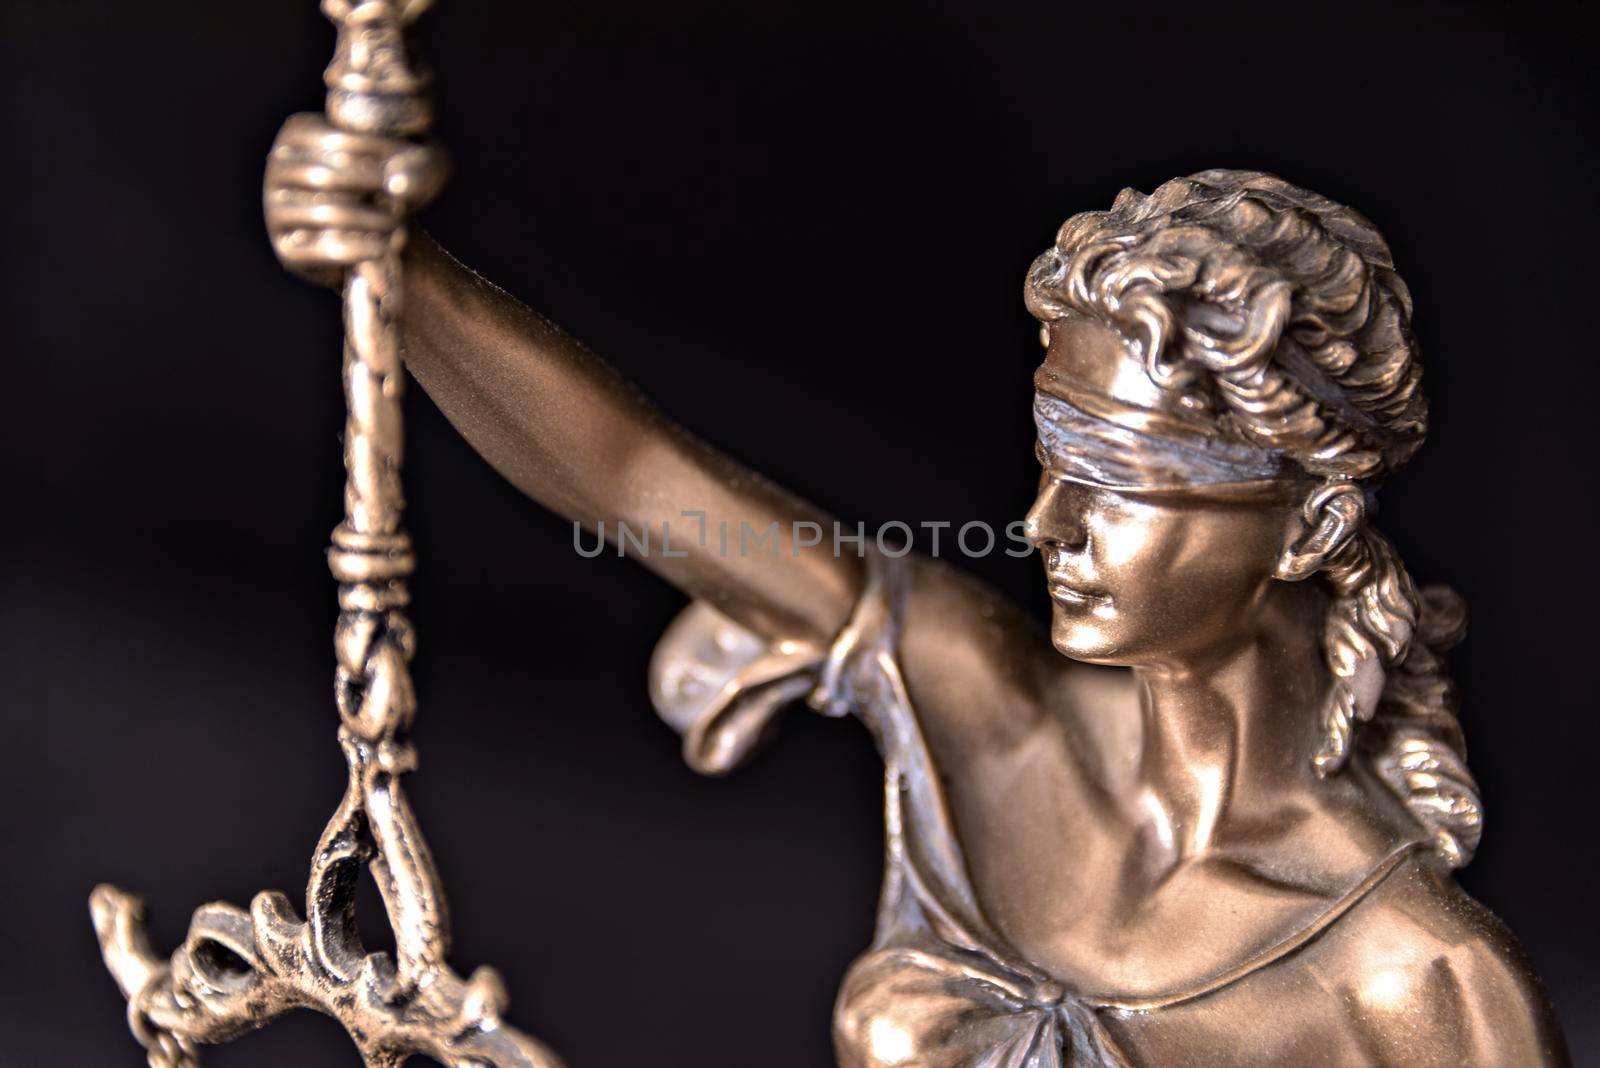 The Statue of Justice symbol, legal law concept image